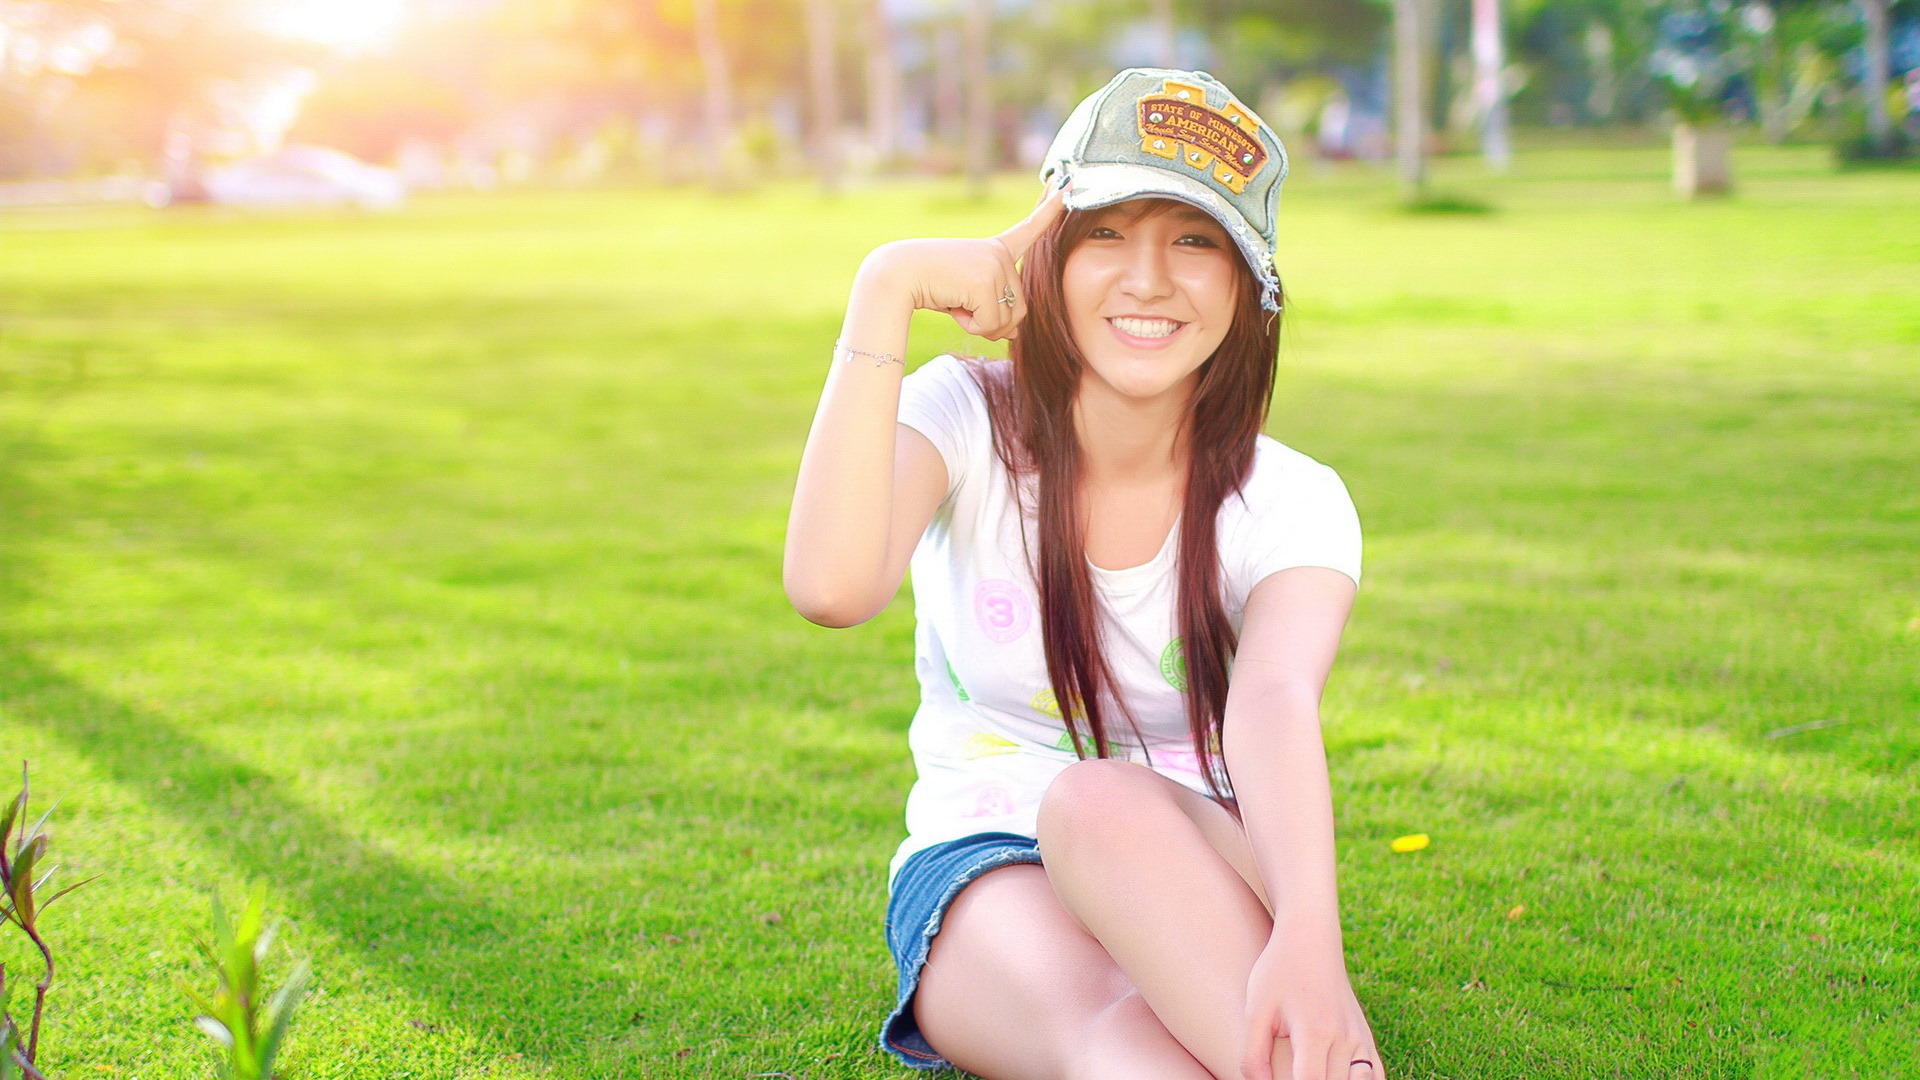 Pure and lovely young Asian girl HD wallpapers collection (5) #36 - 1920x1080